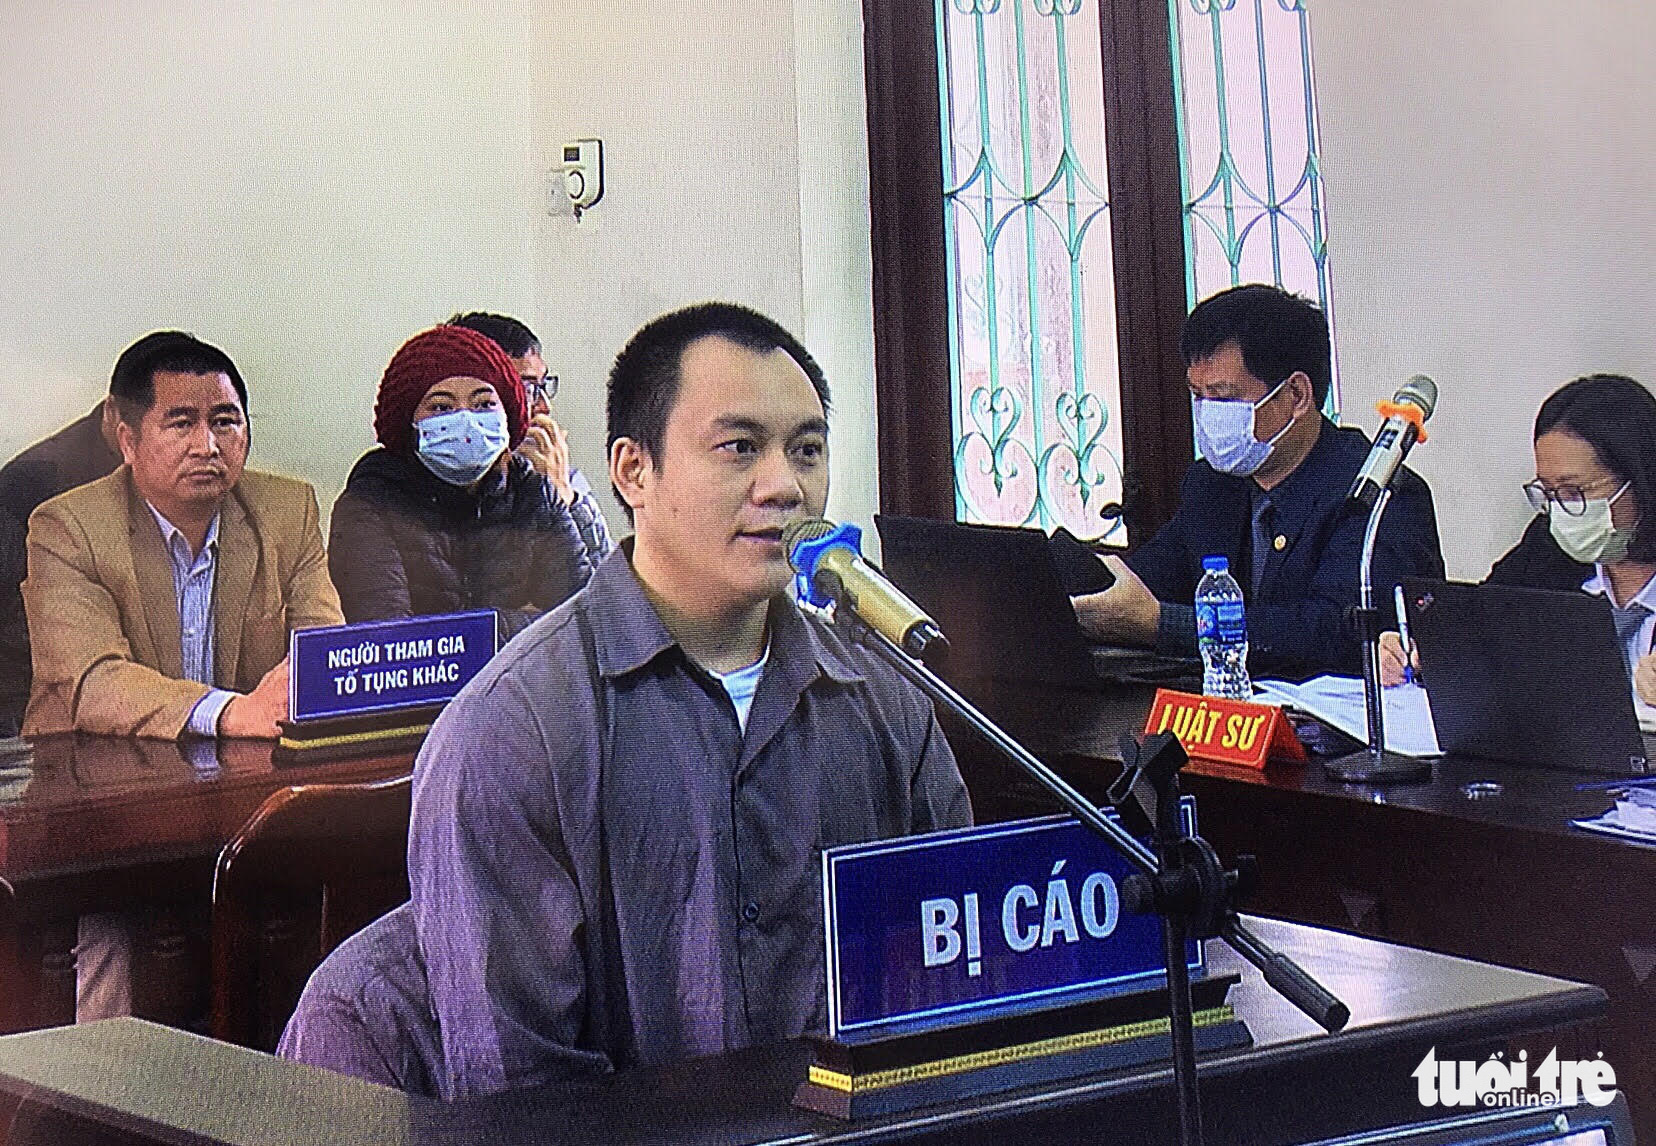 Truck, car drivers jailed over deadly ‘reversing car’ accident on northern Vietnamese expressway